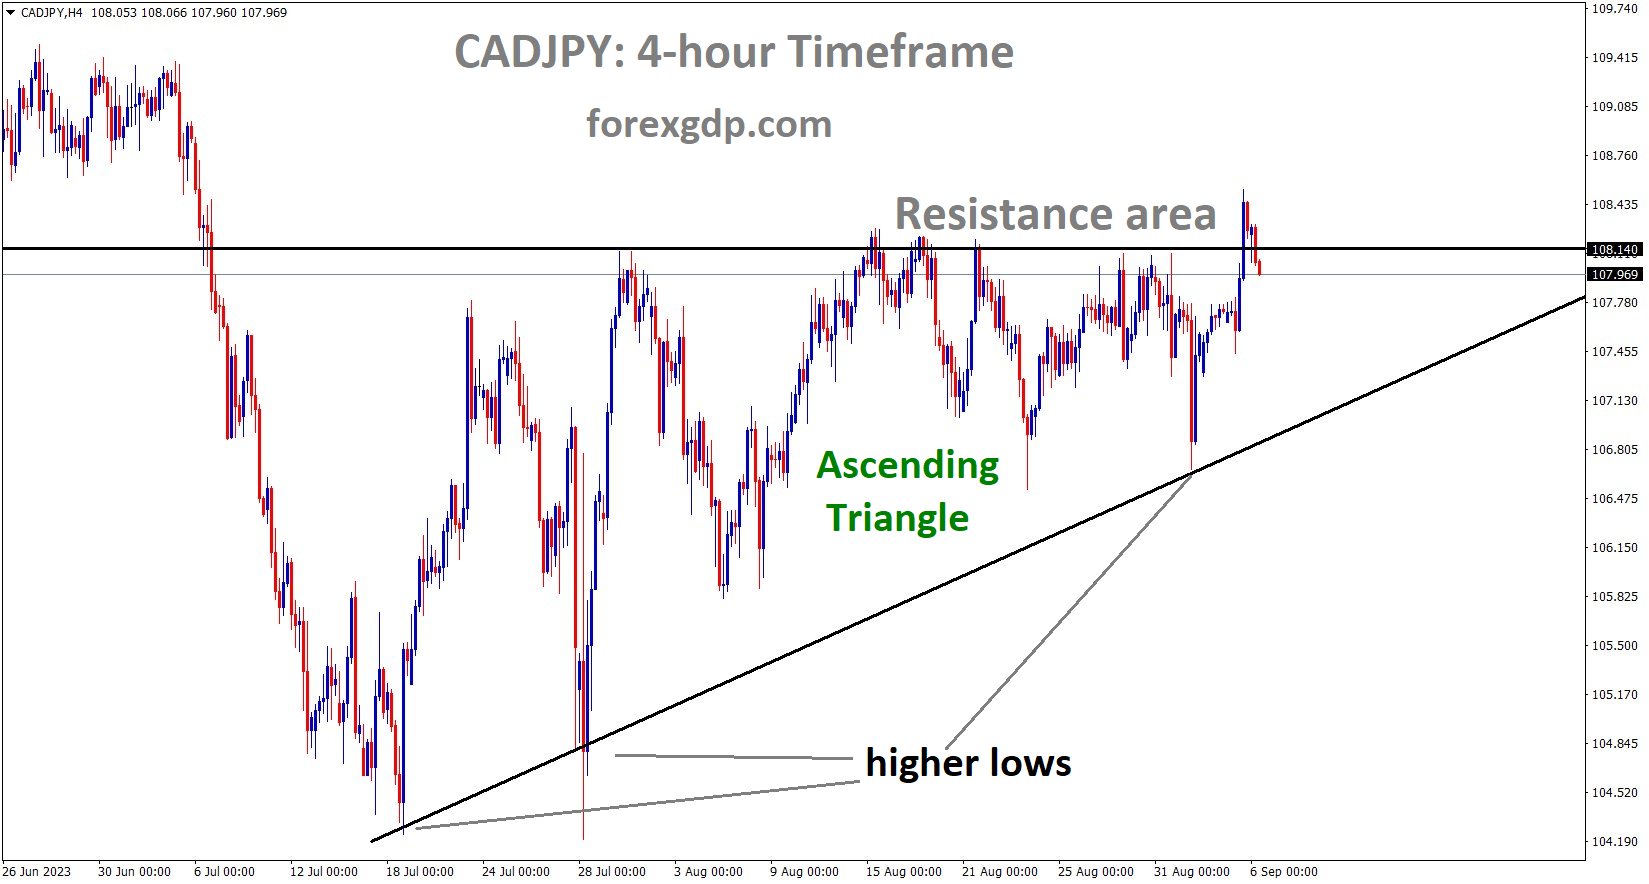 CADJPY H4 TF Analysis Market is moving in the Ascending triangle pattern and the market has reached the resistance area of the pattern